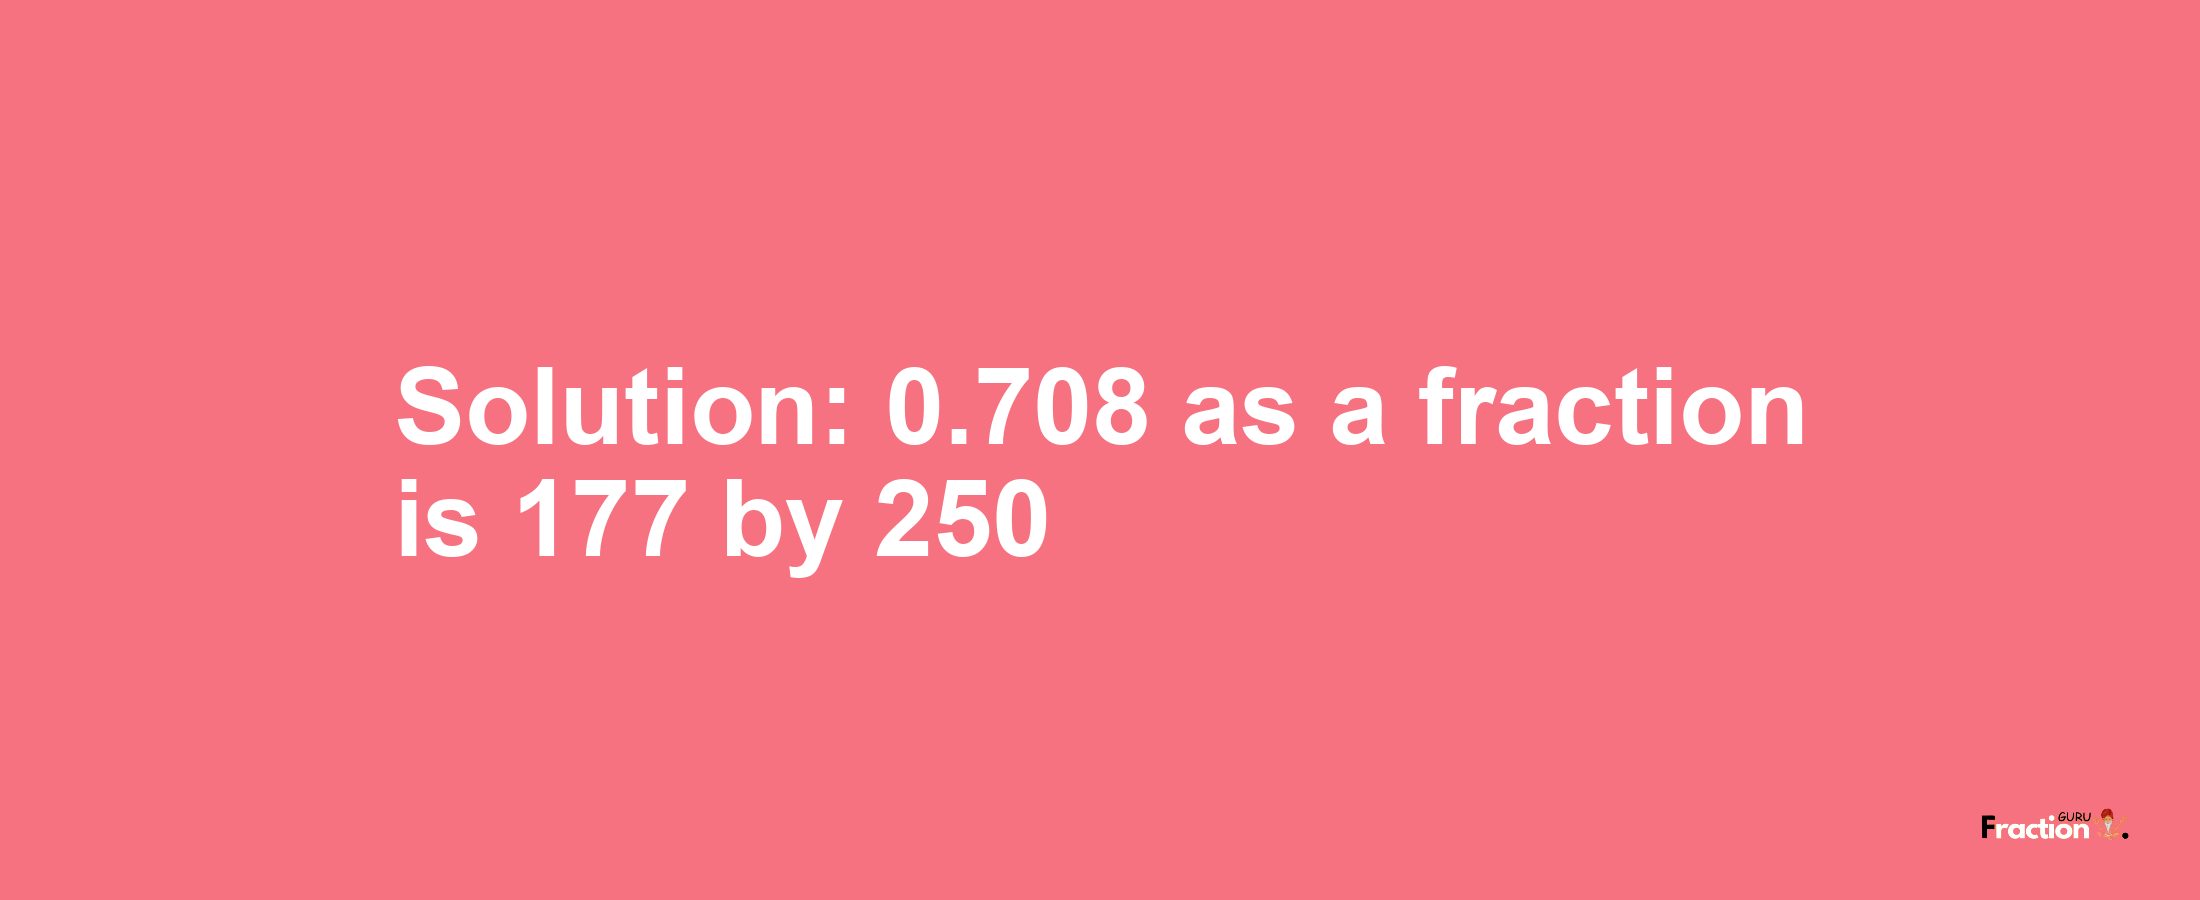 Solution:0.708 as a fraction is 177/250